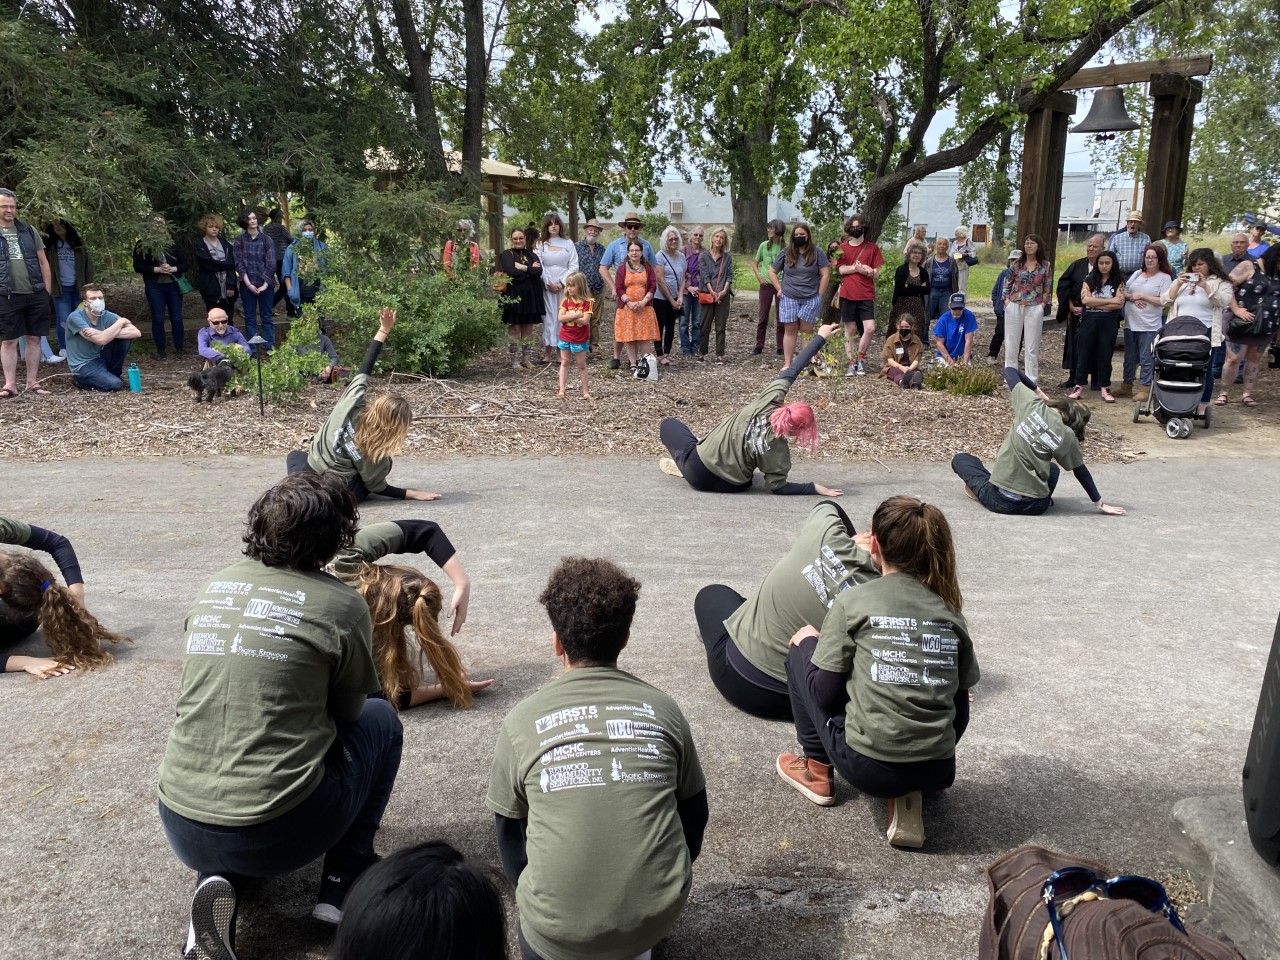 Youth dancers wearing forest green long-sleeve shirts and black pants performing for a crowd in a forested area outside.